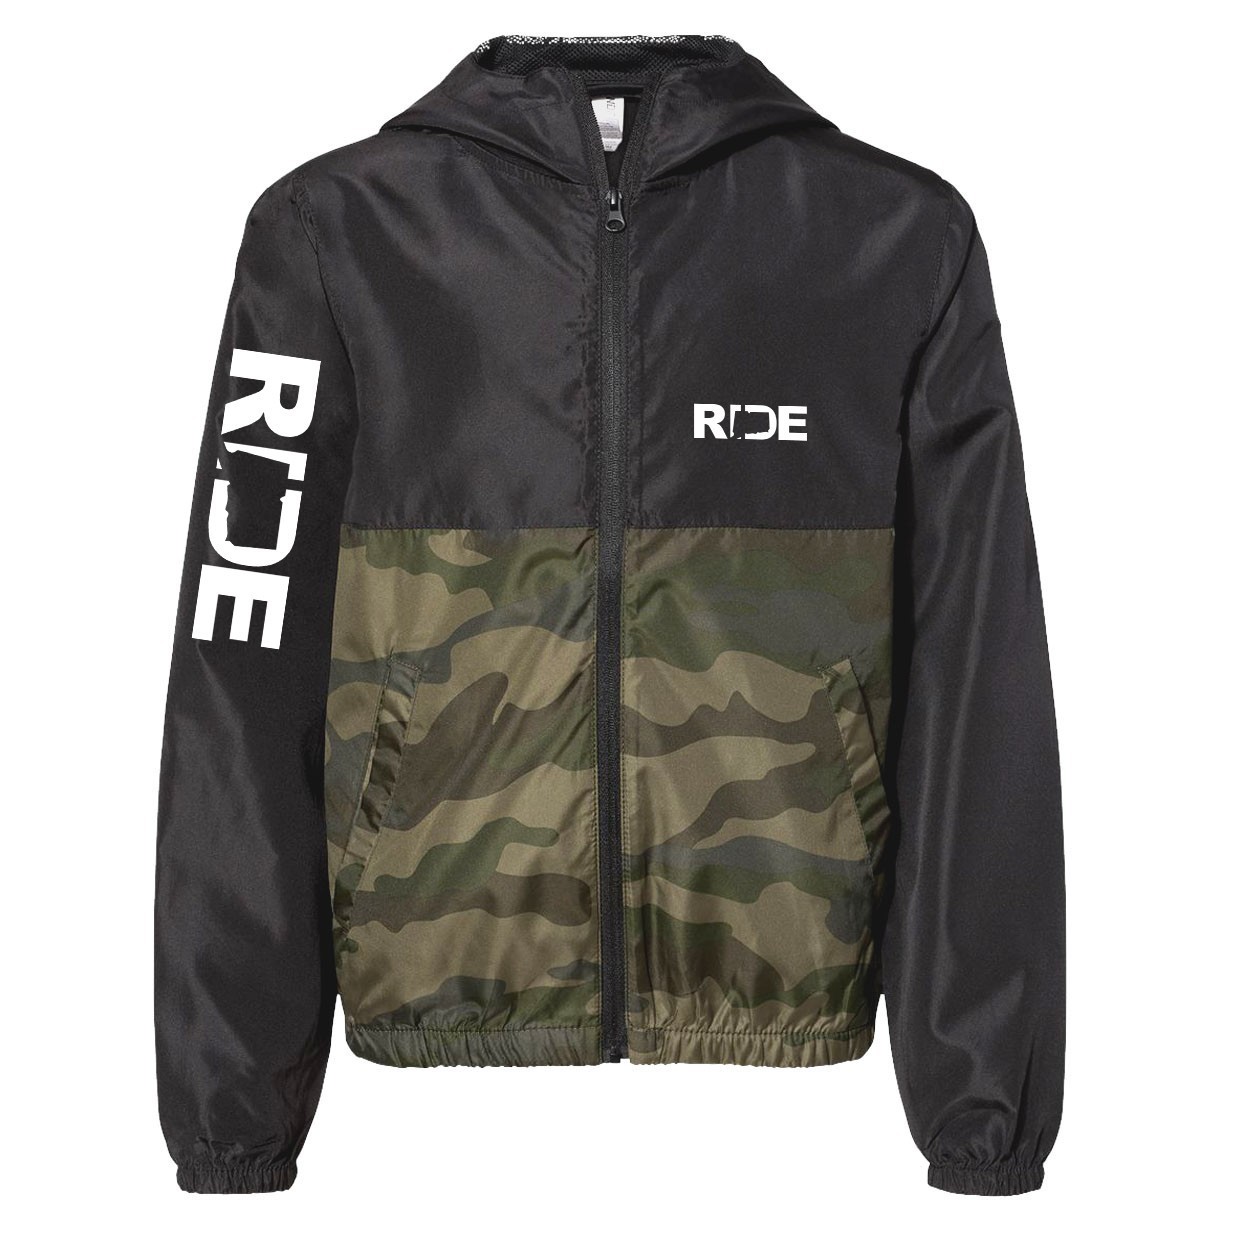 Ride Connecticut Classic Youth Lightweight Windbreaker Black/Forest Camo (White Logo)